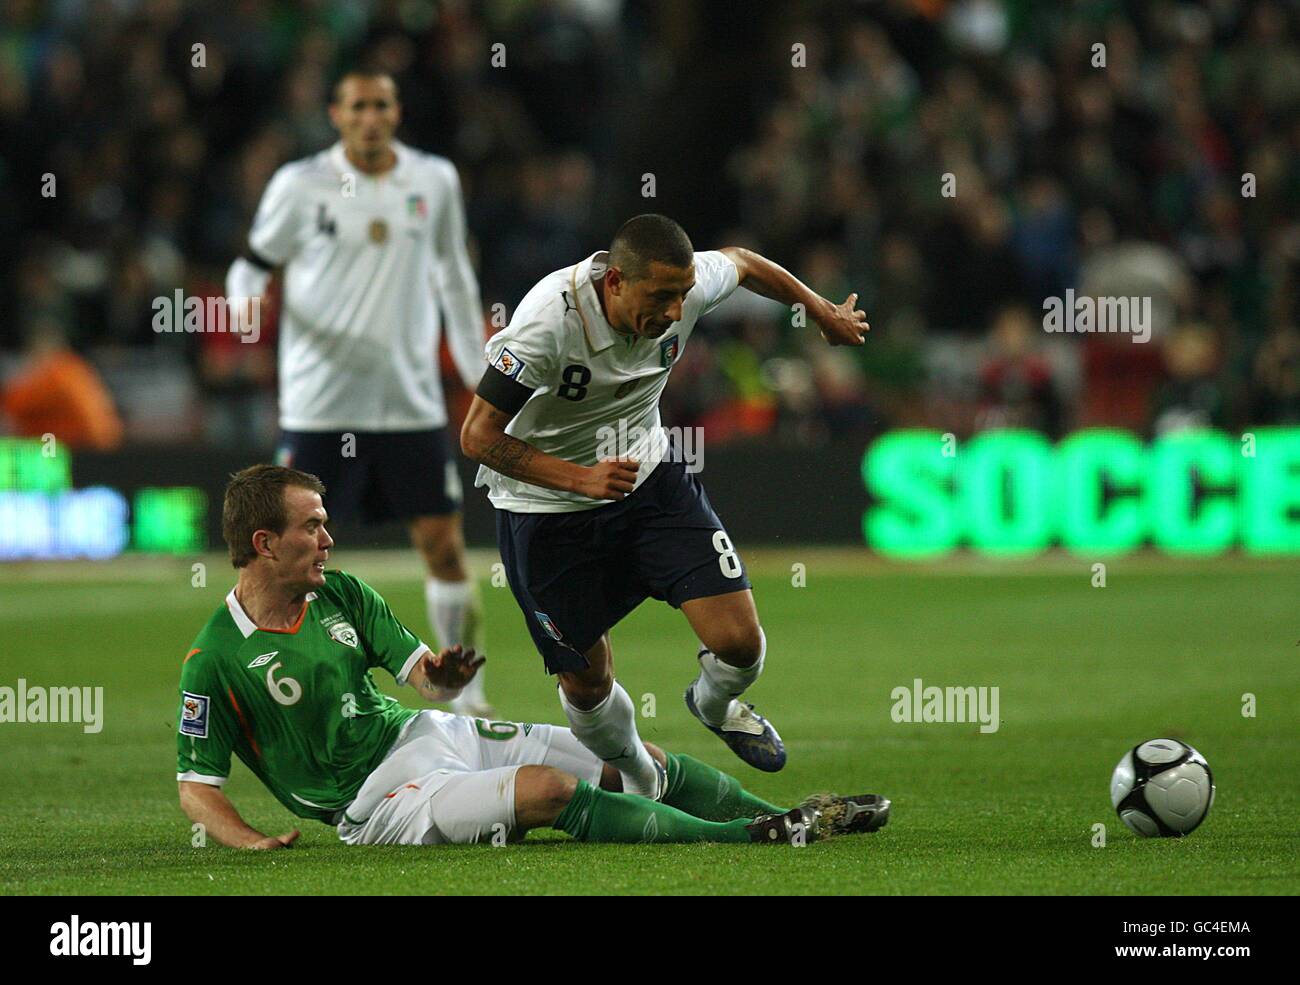 Soccer - FIFA World Cup 2010 - Qualifying Round - Group Eight - Republic of Ireland v Italy - Croke Park. Republic of Ireland's Glenn Whelan (left) and Italy's Angelo Palombo (right) battle for the ball Stock Photo